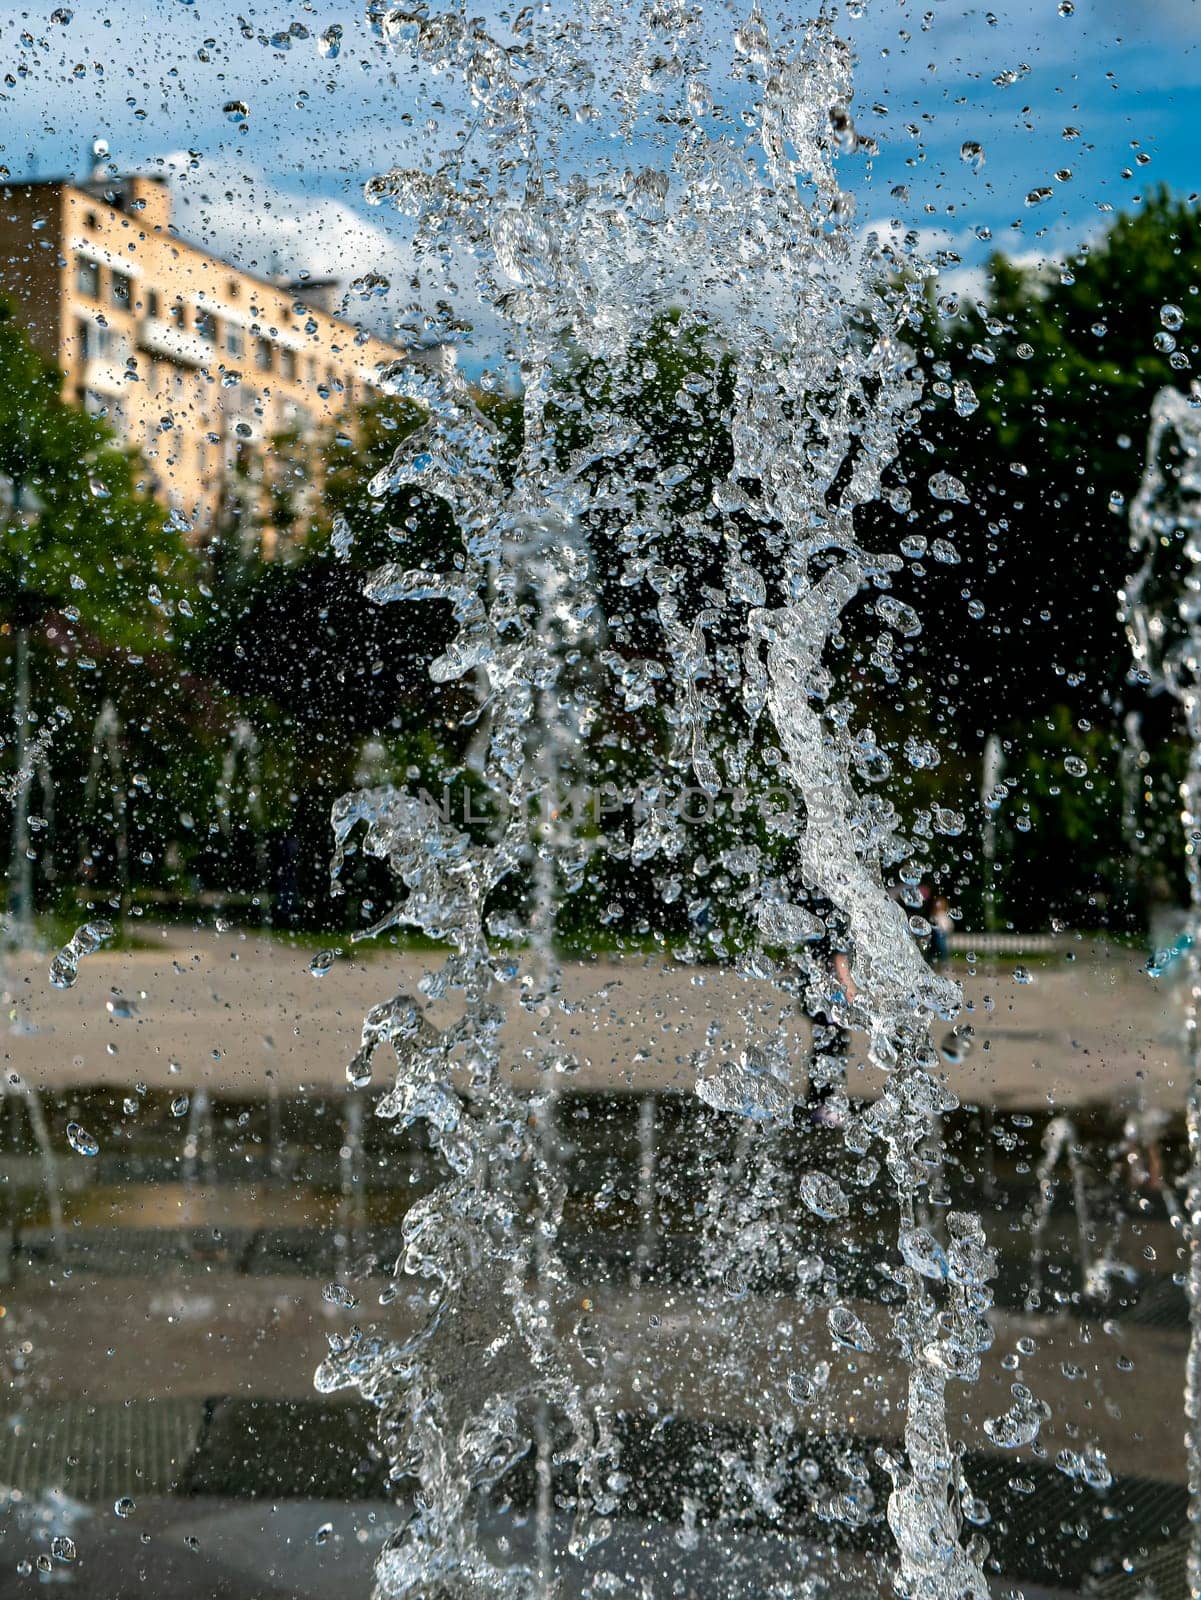 Fountain water jets working in a city park.